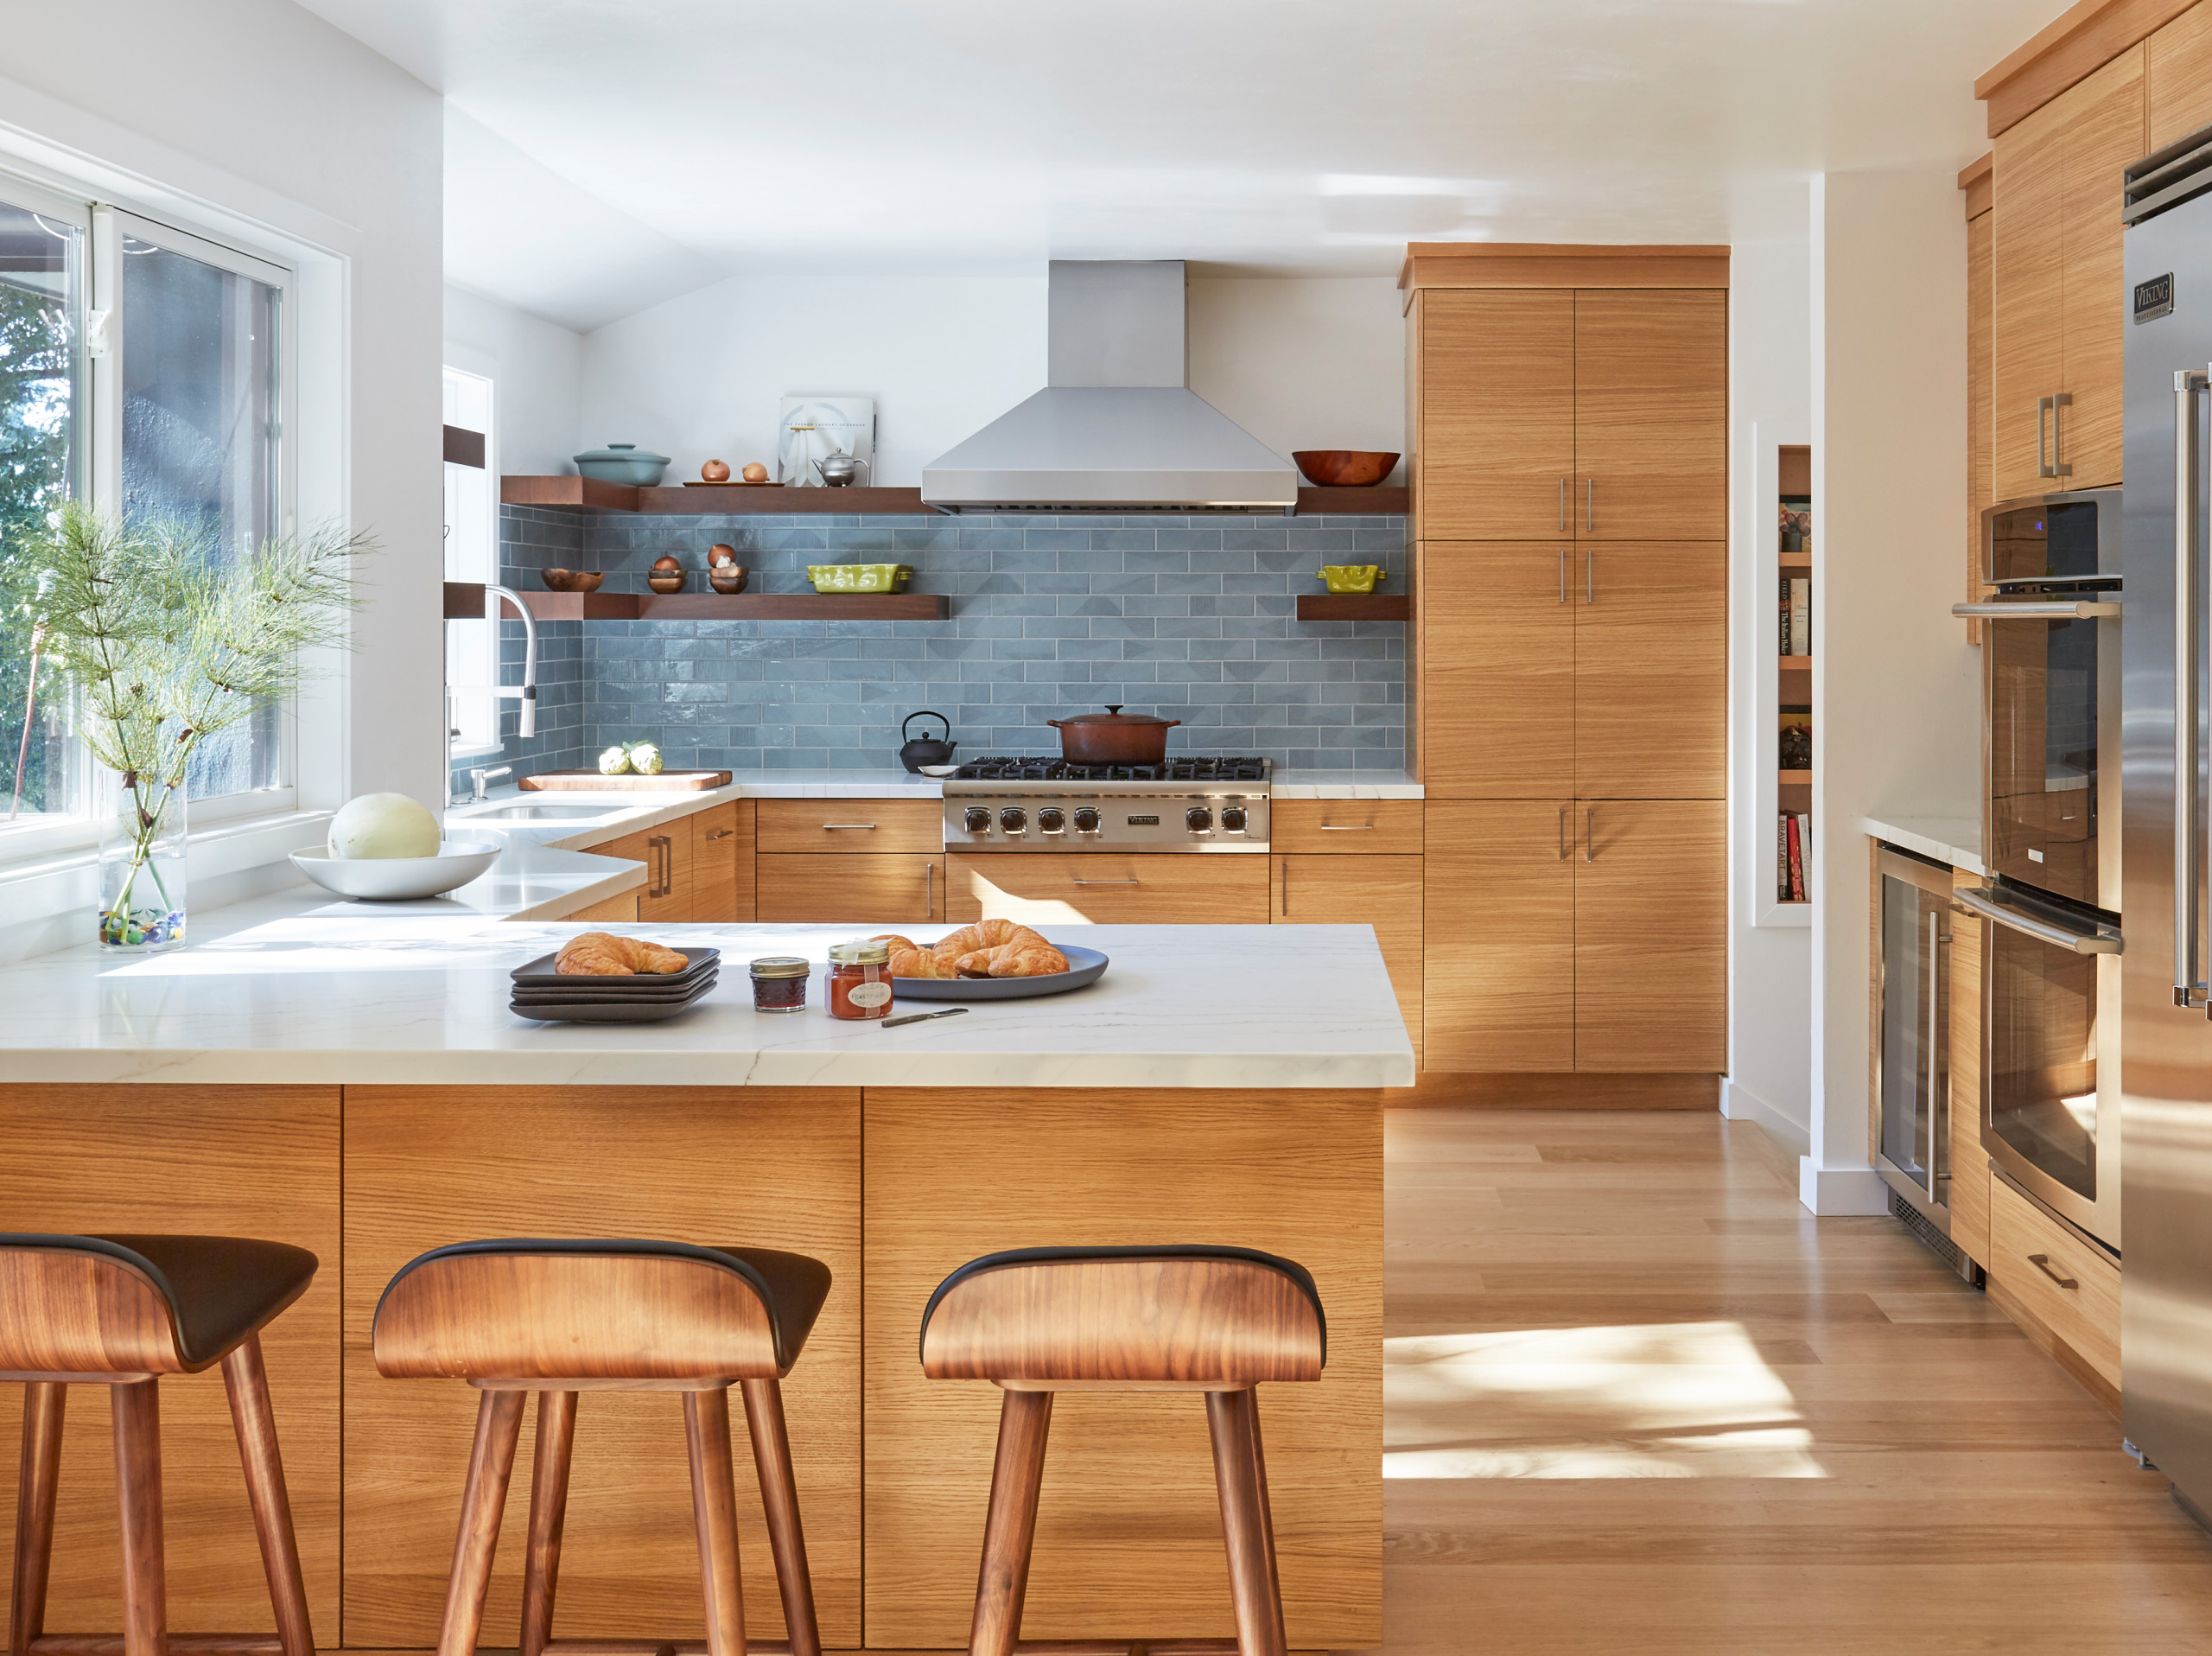 20 Contemporary Kitchen Ideas You'll Love   August, 20   Houzz